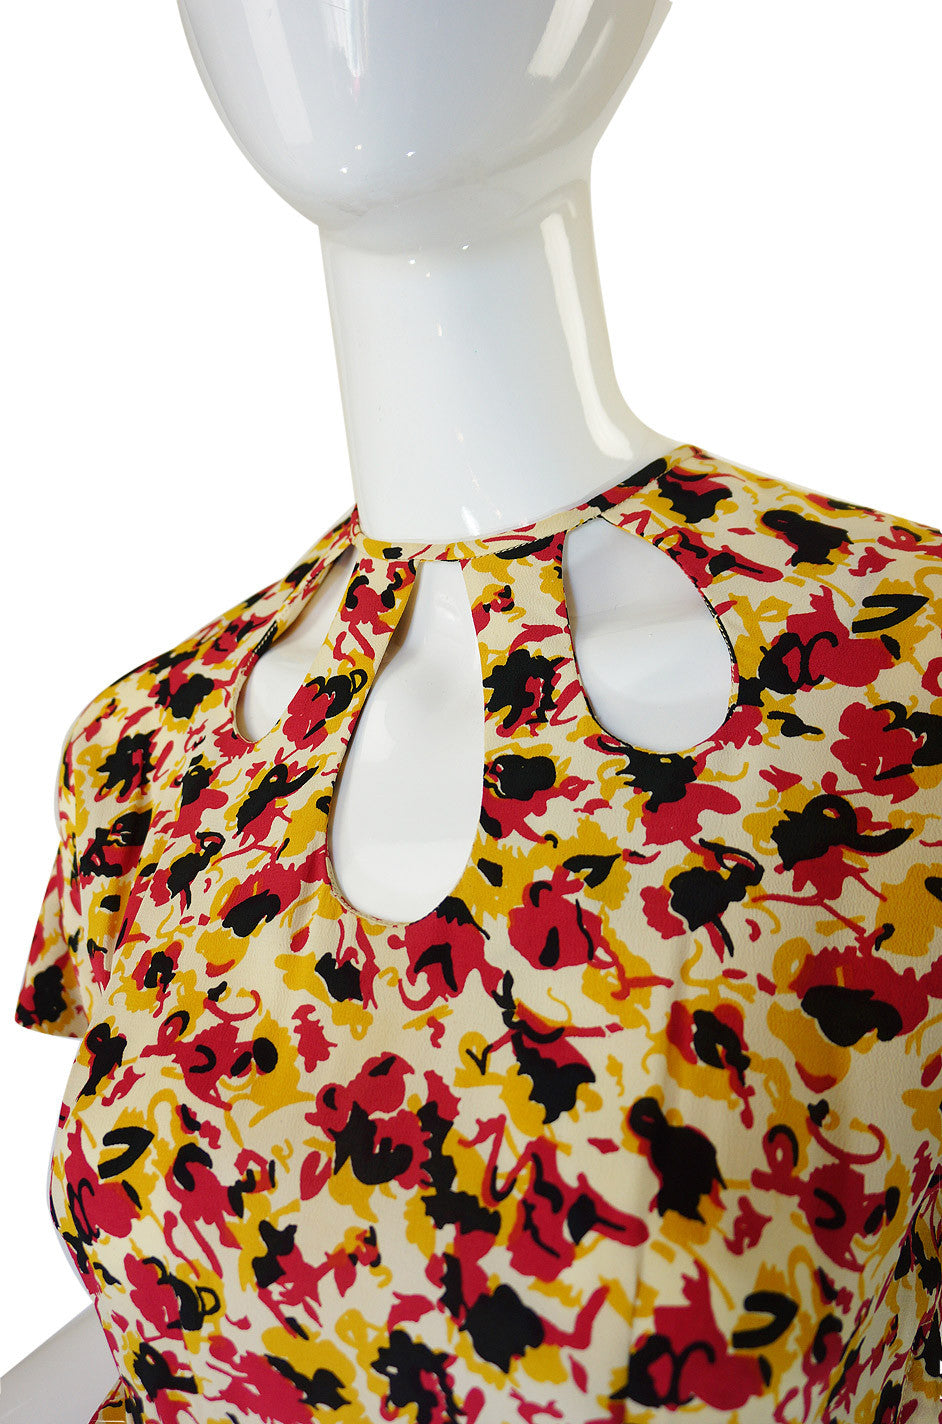 1940s Silk Floral Day Dress with Cutouts | shrimptoncouture.com